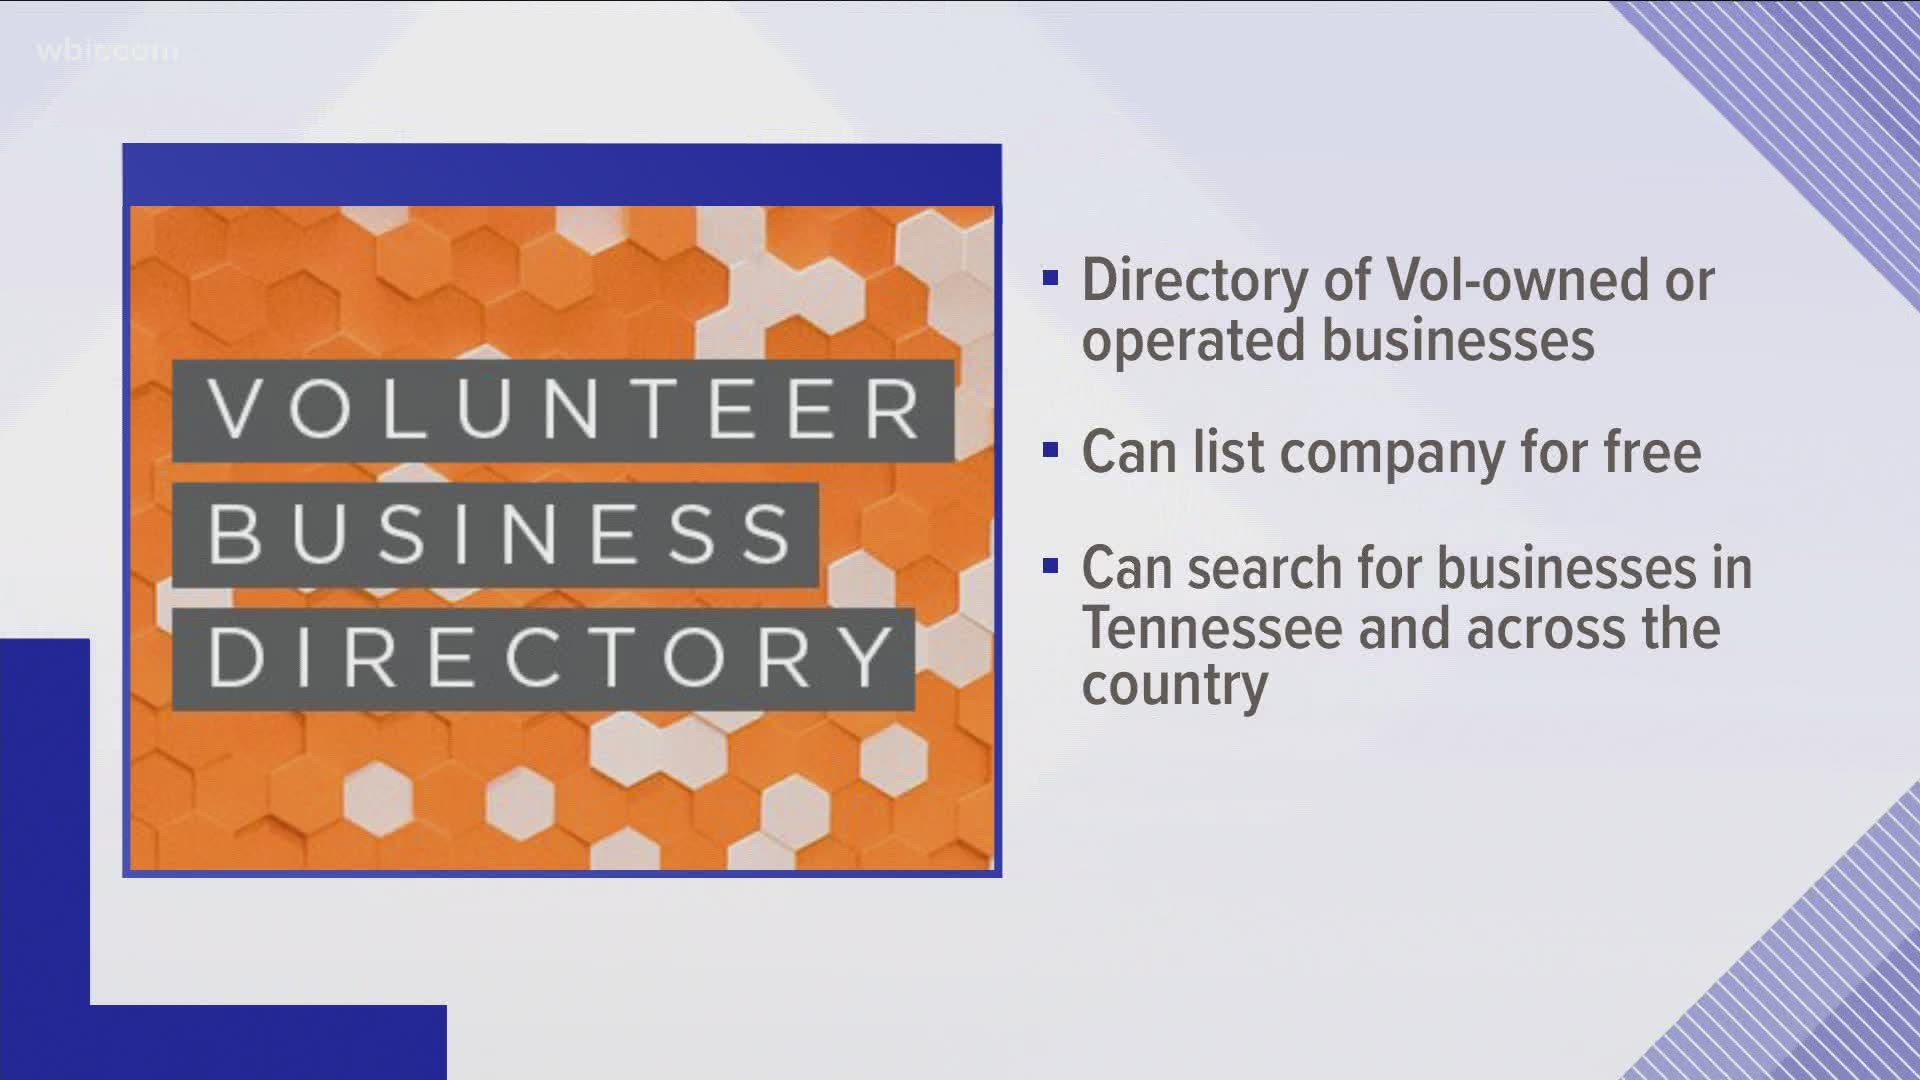 The directory shows businesses owned and operated by UT alumni, making it easier to connect with other graduates.